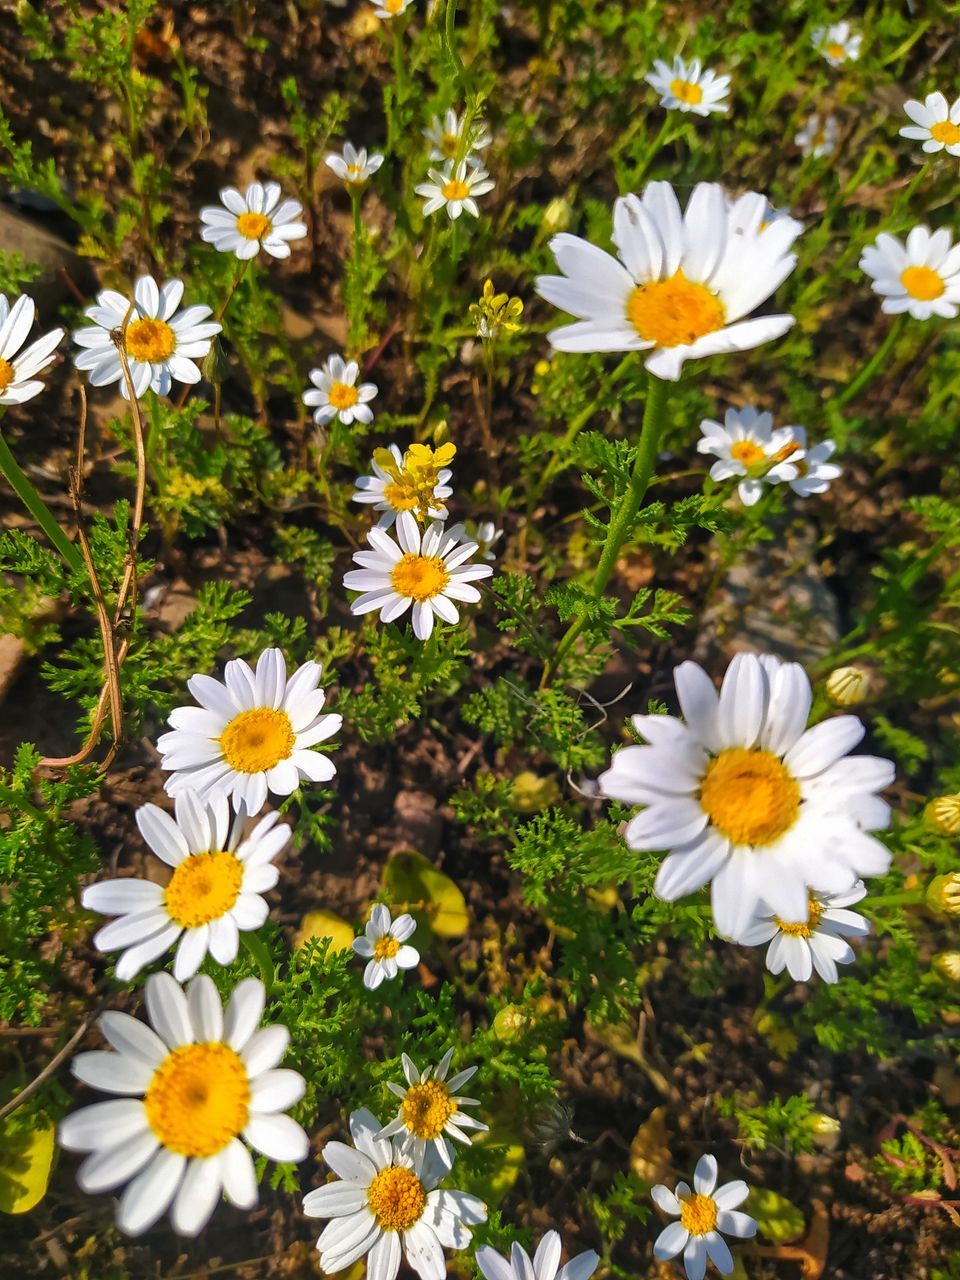 HIGH ANGLE VIEW OF WHITE DAISIES ON FIELD